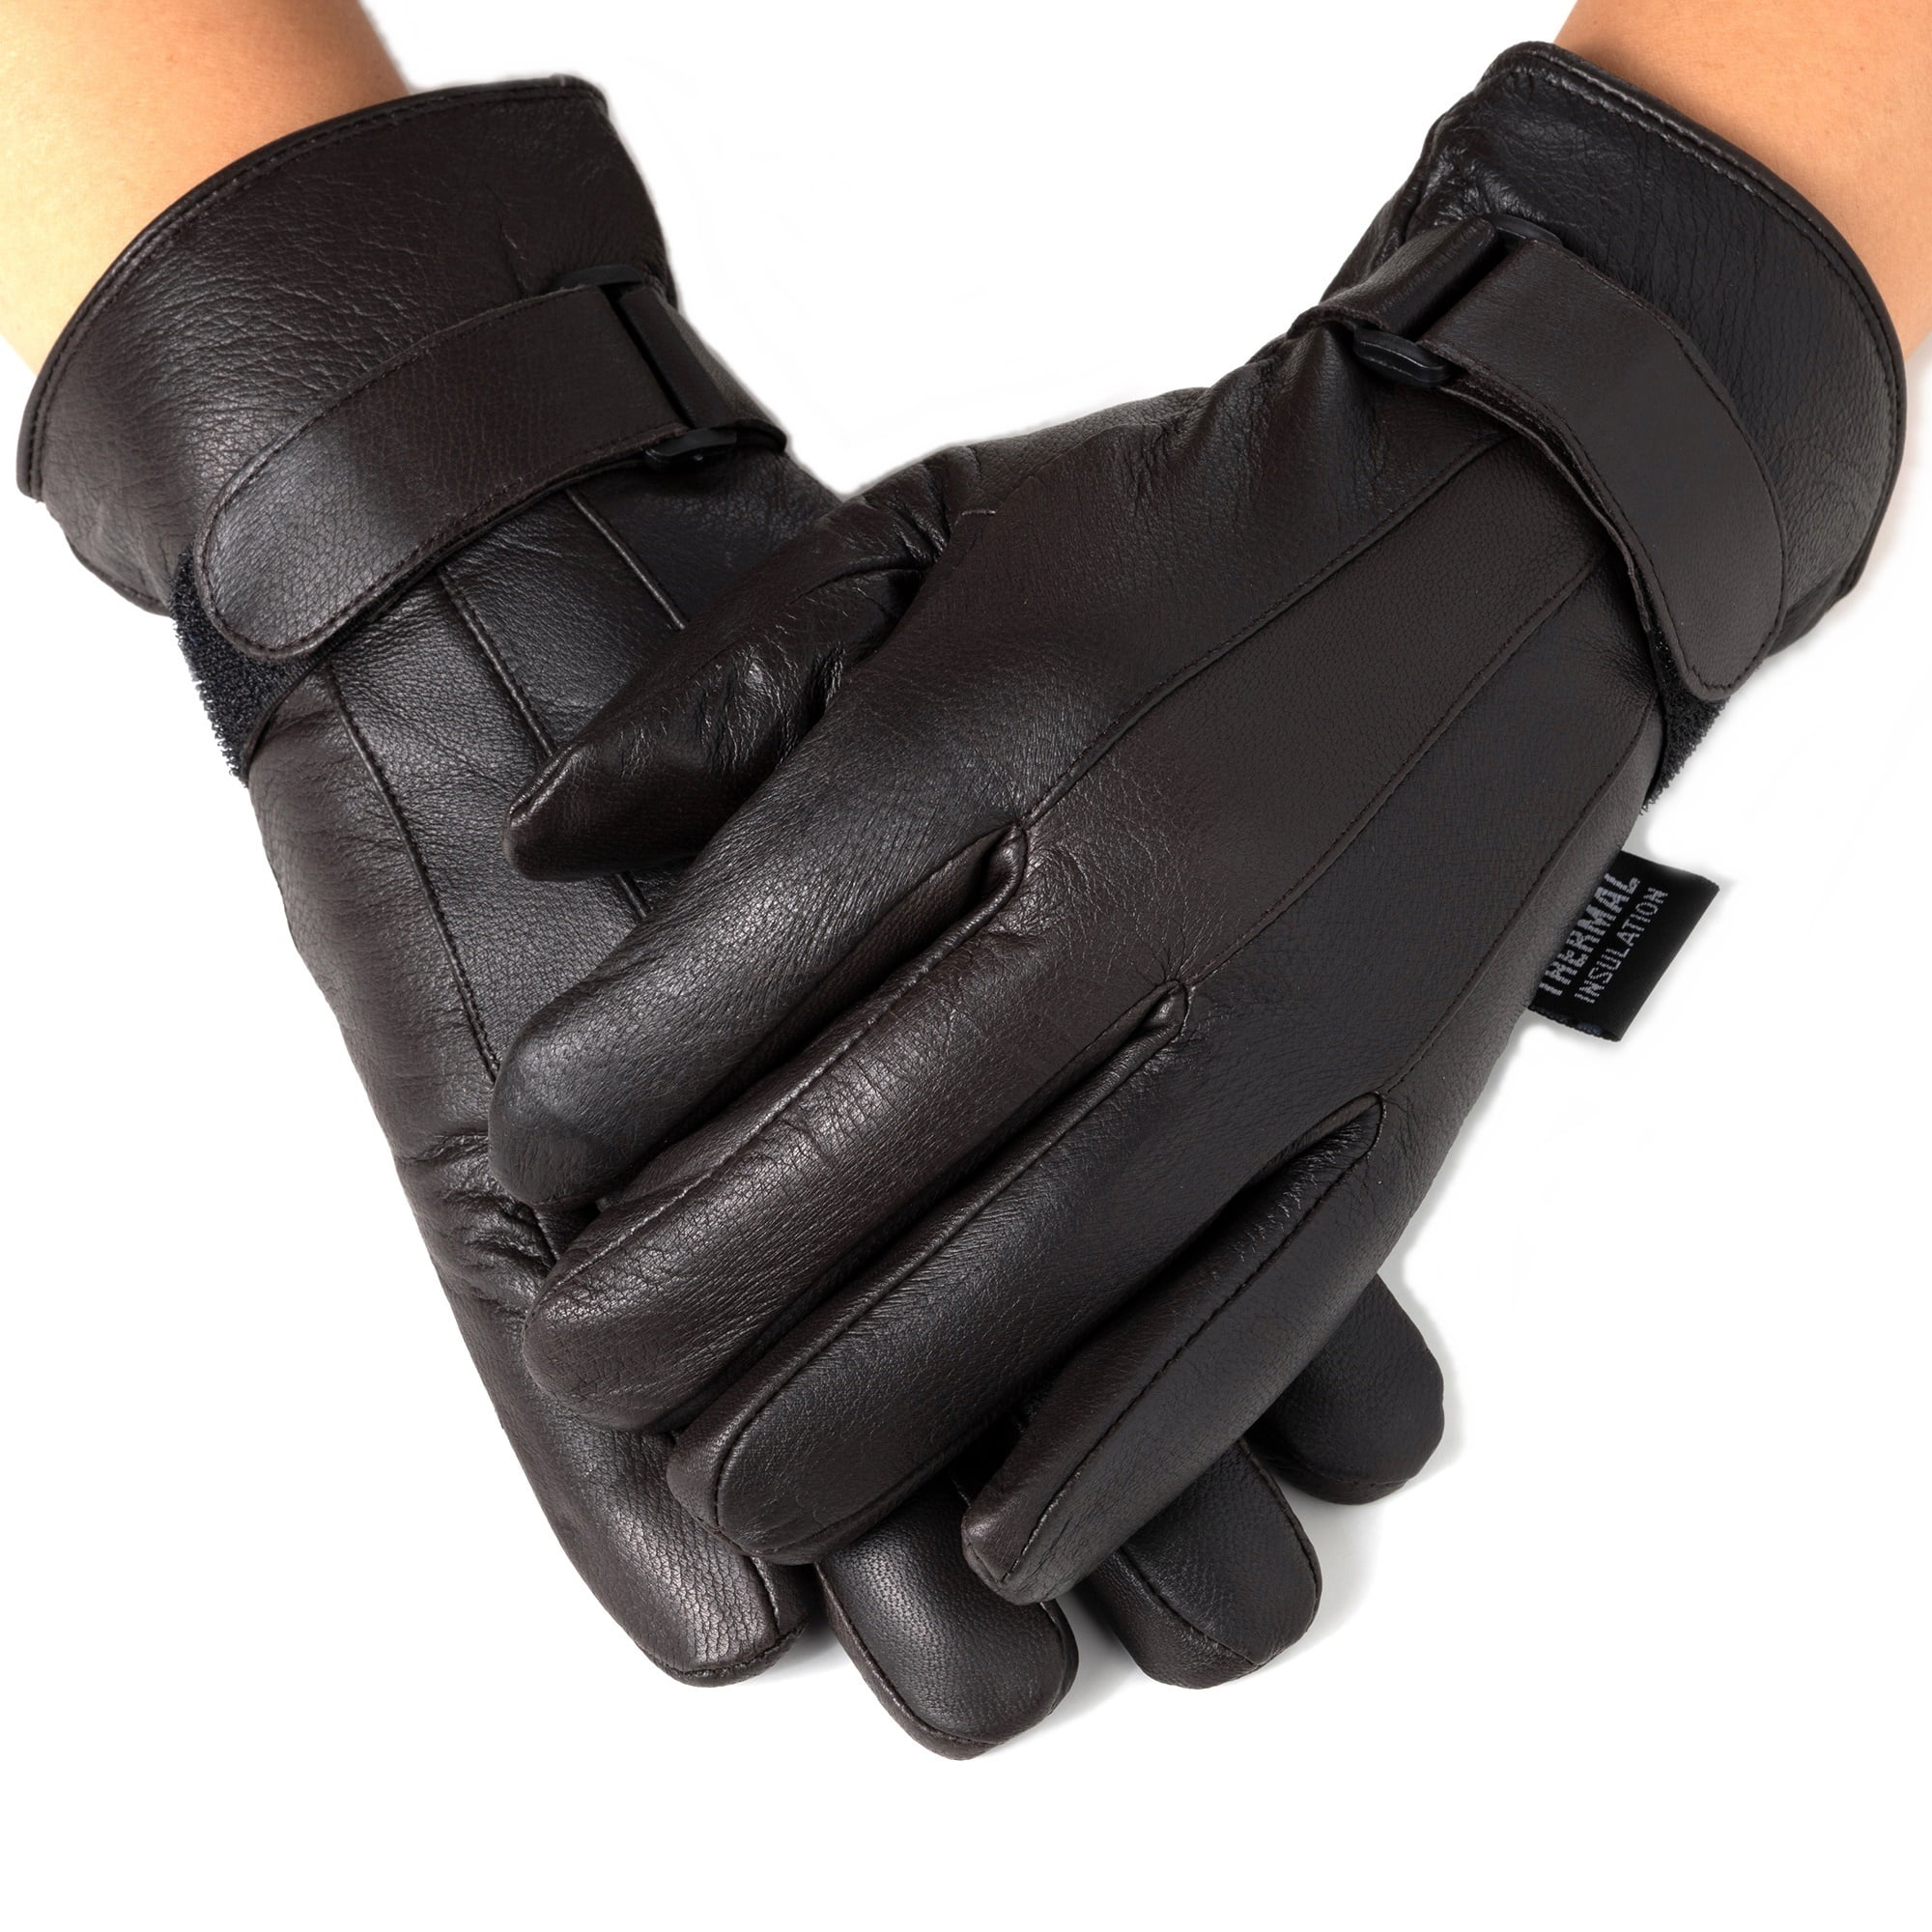 Black Isotoner mens SLEEKHEAT Cold Weather touch screen winter gloves Large 